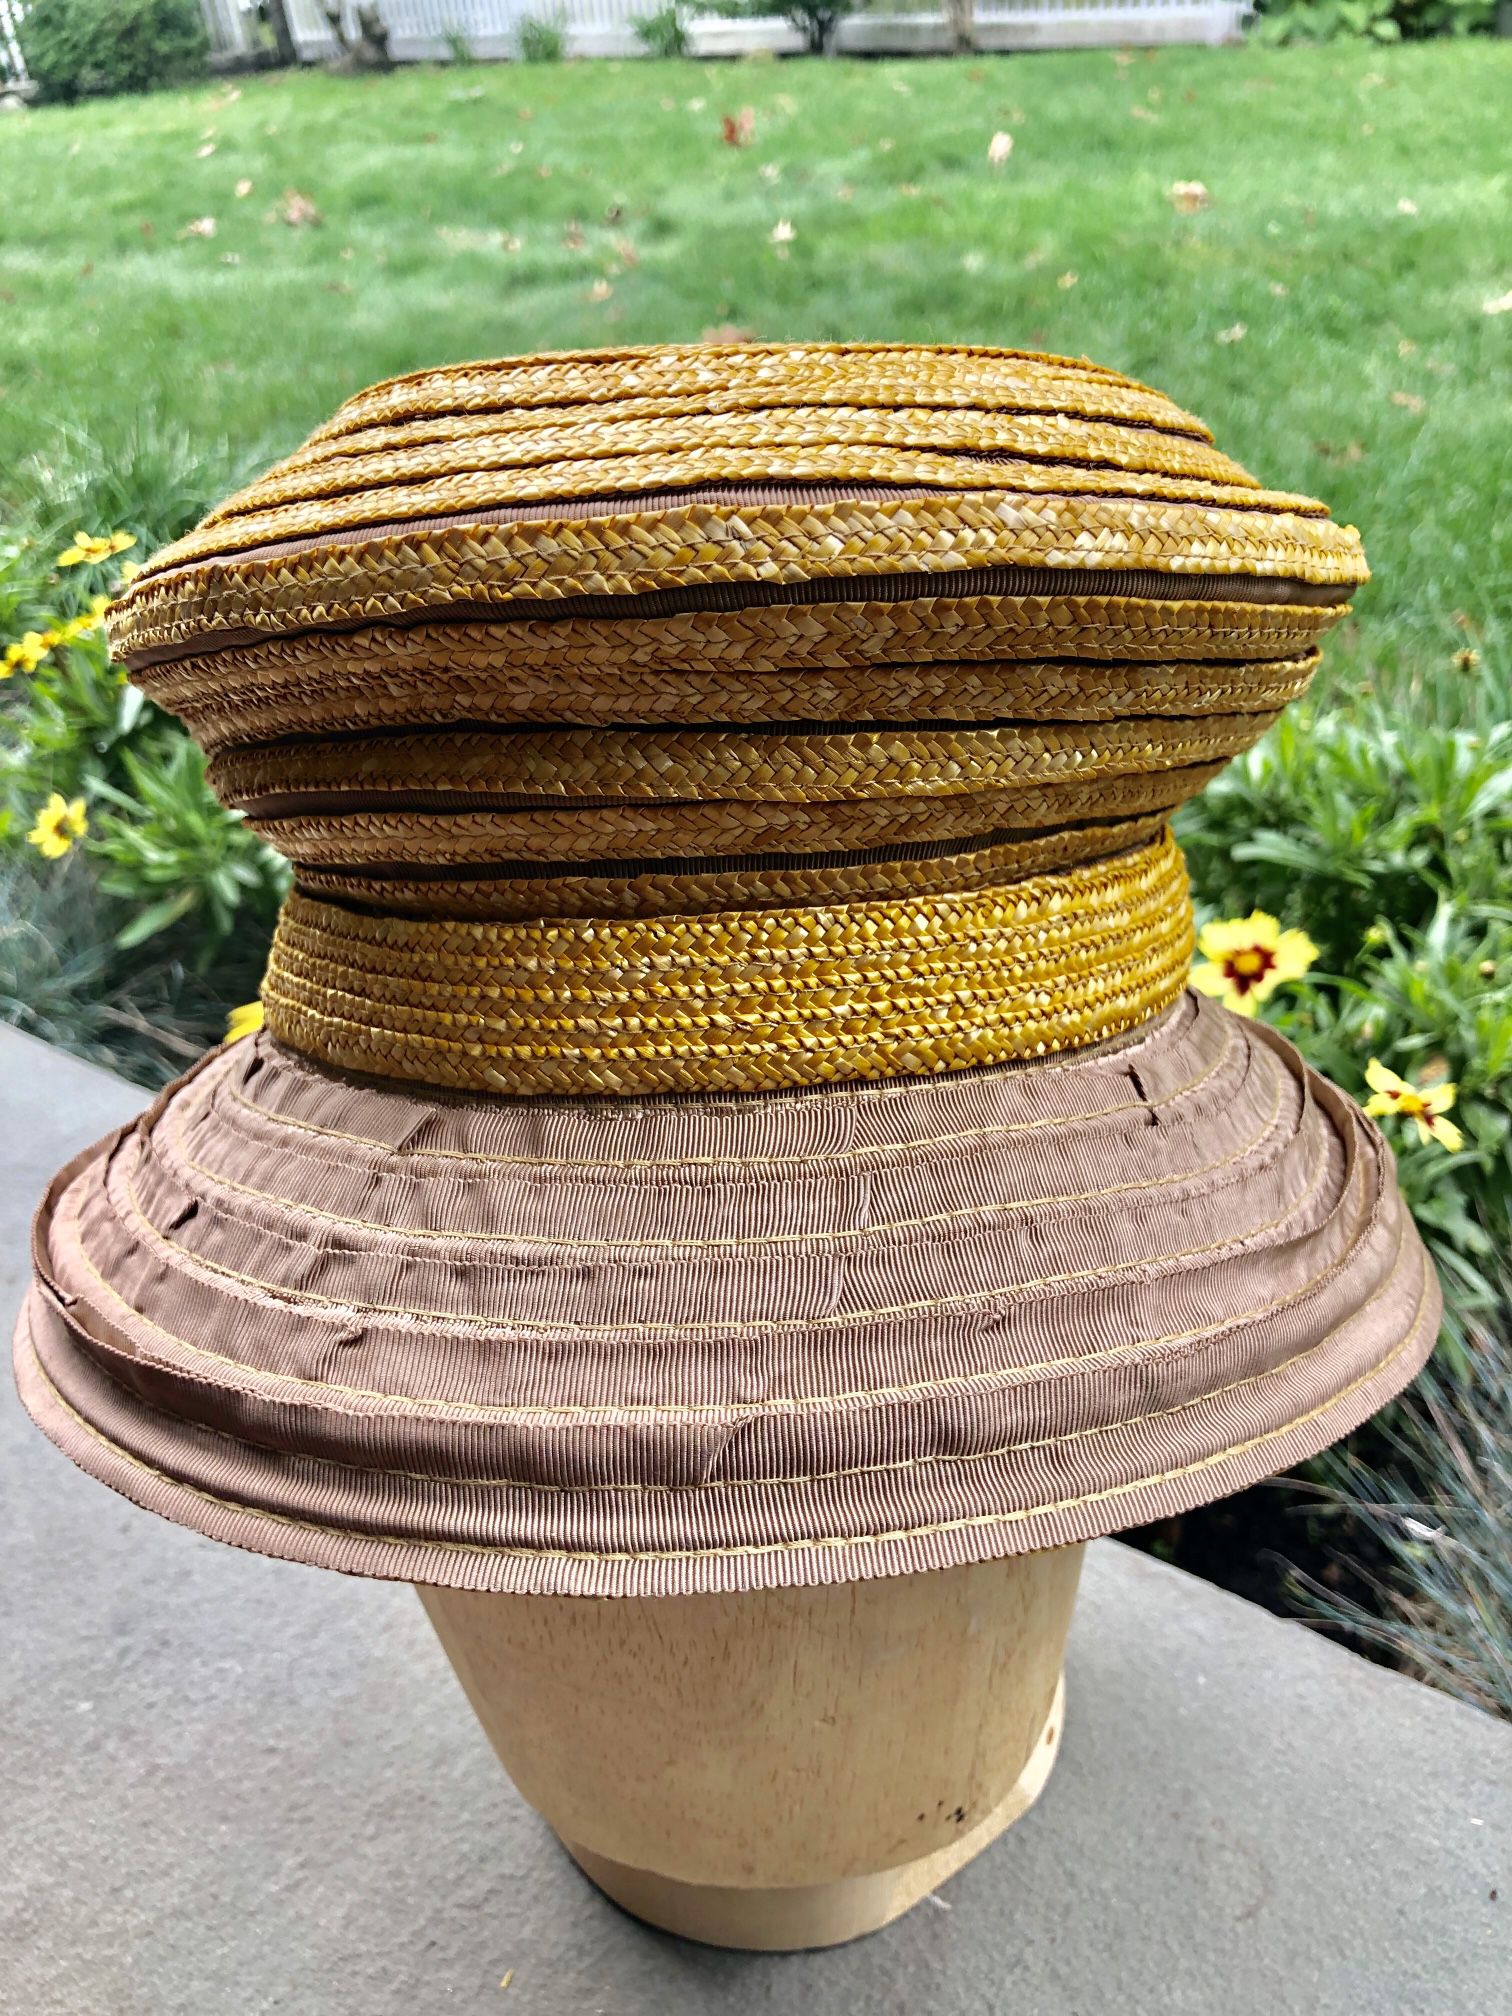  COLLAPSABLE HAT-Spring Promo-EASY CARRYING 